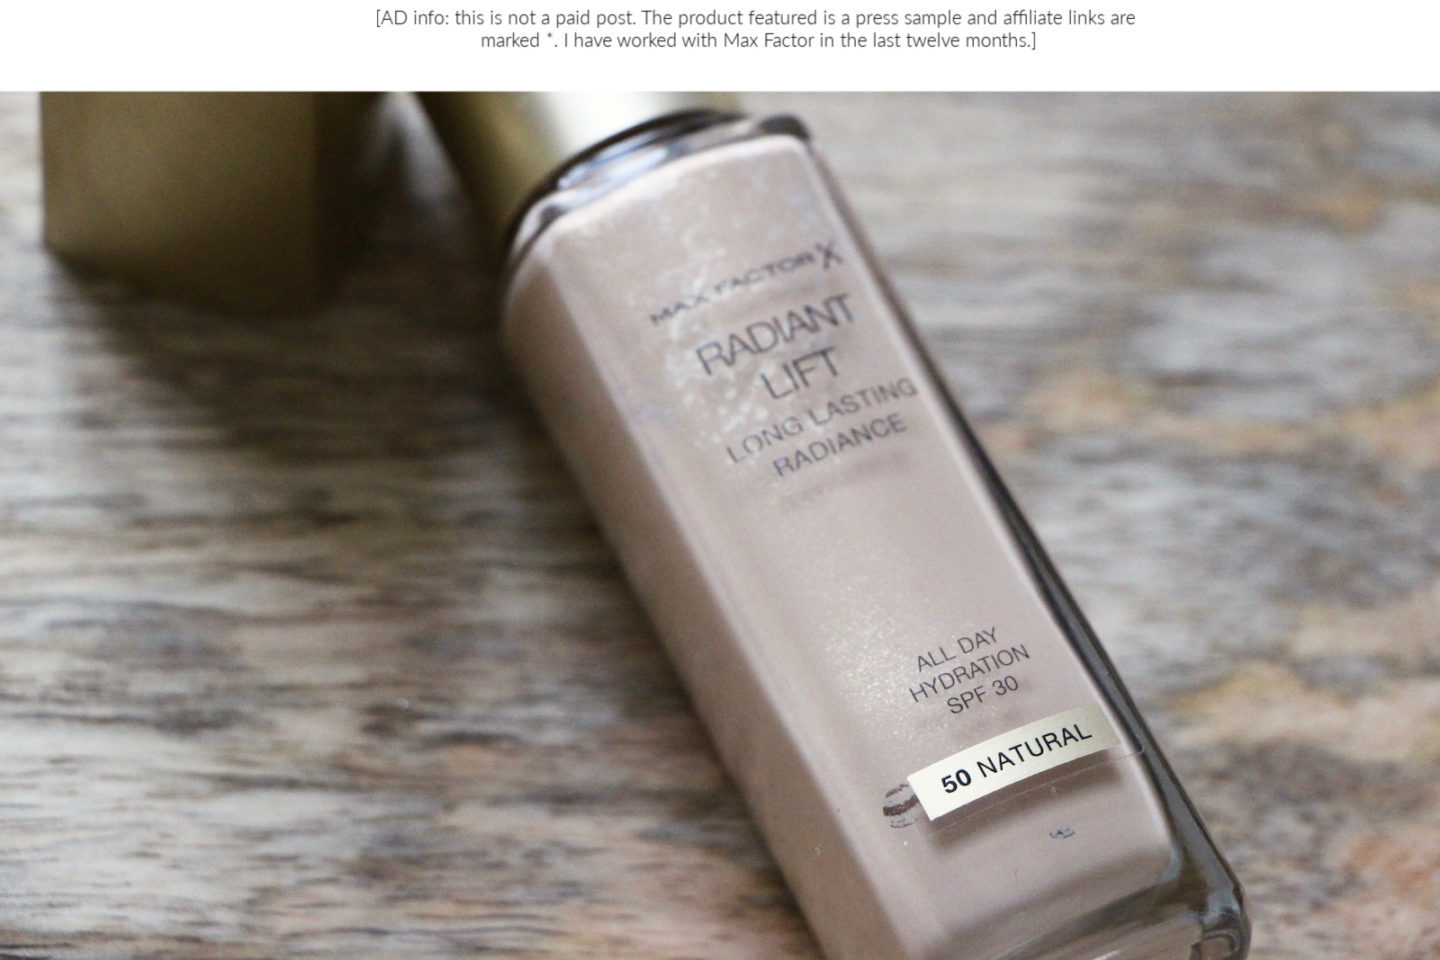 Foundation Review: Max Factor Radiant Lift